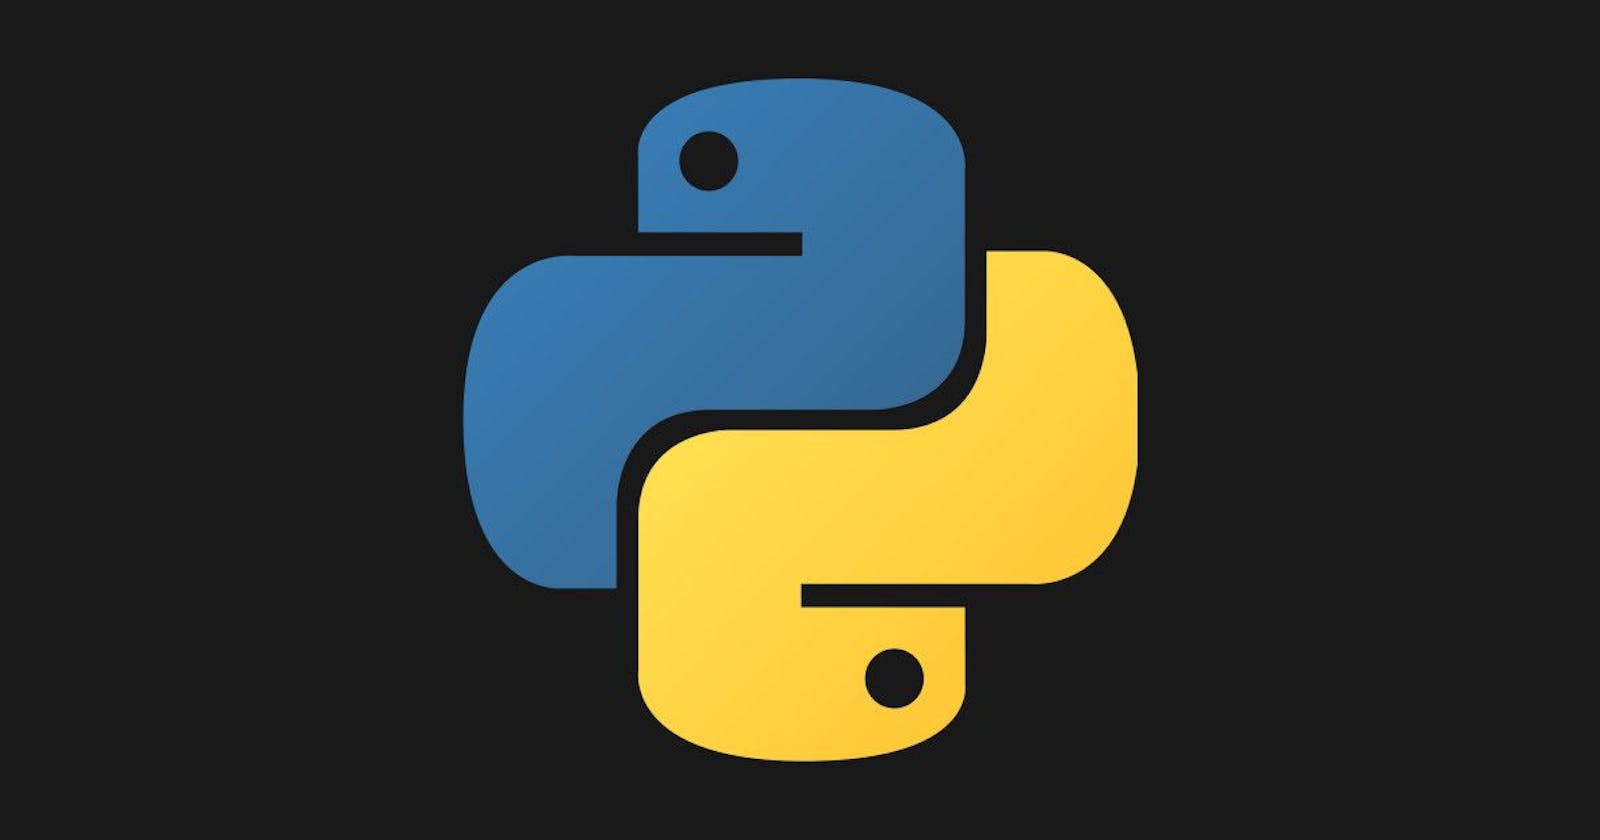 How to Download Python 3 On Windows Without any Incorrect Version